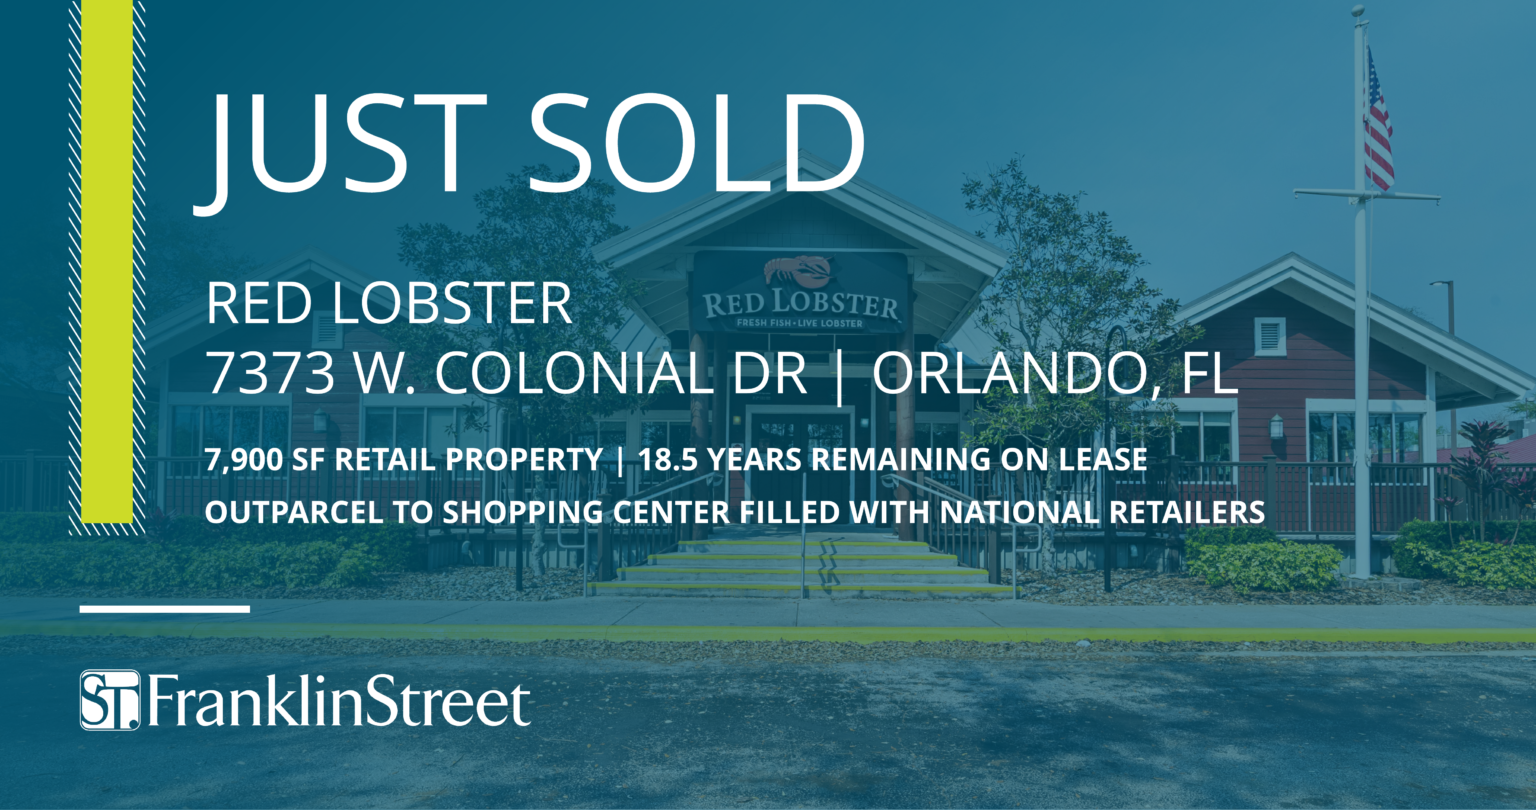 Franklin Street Brokers Sale of Retail Property Leased to Red Lobster